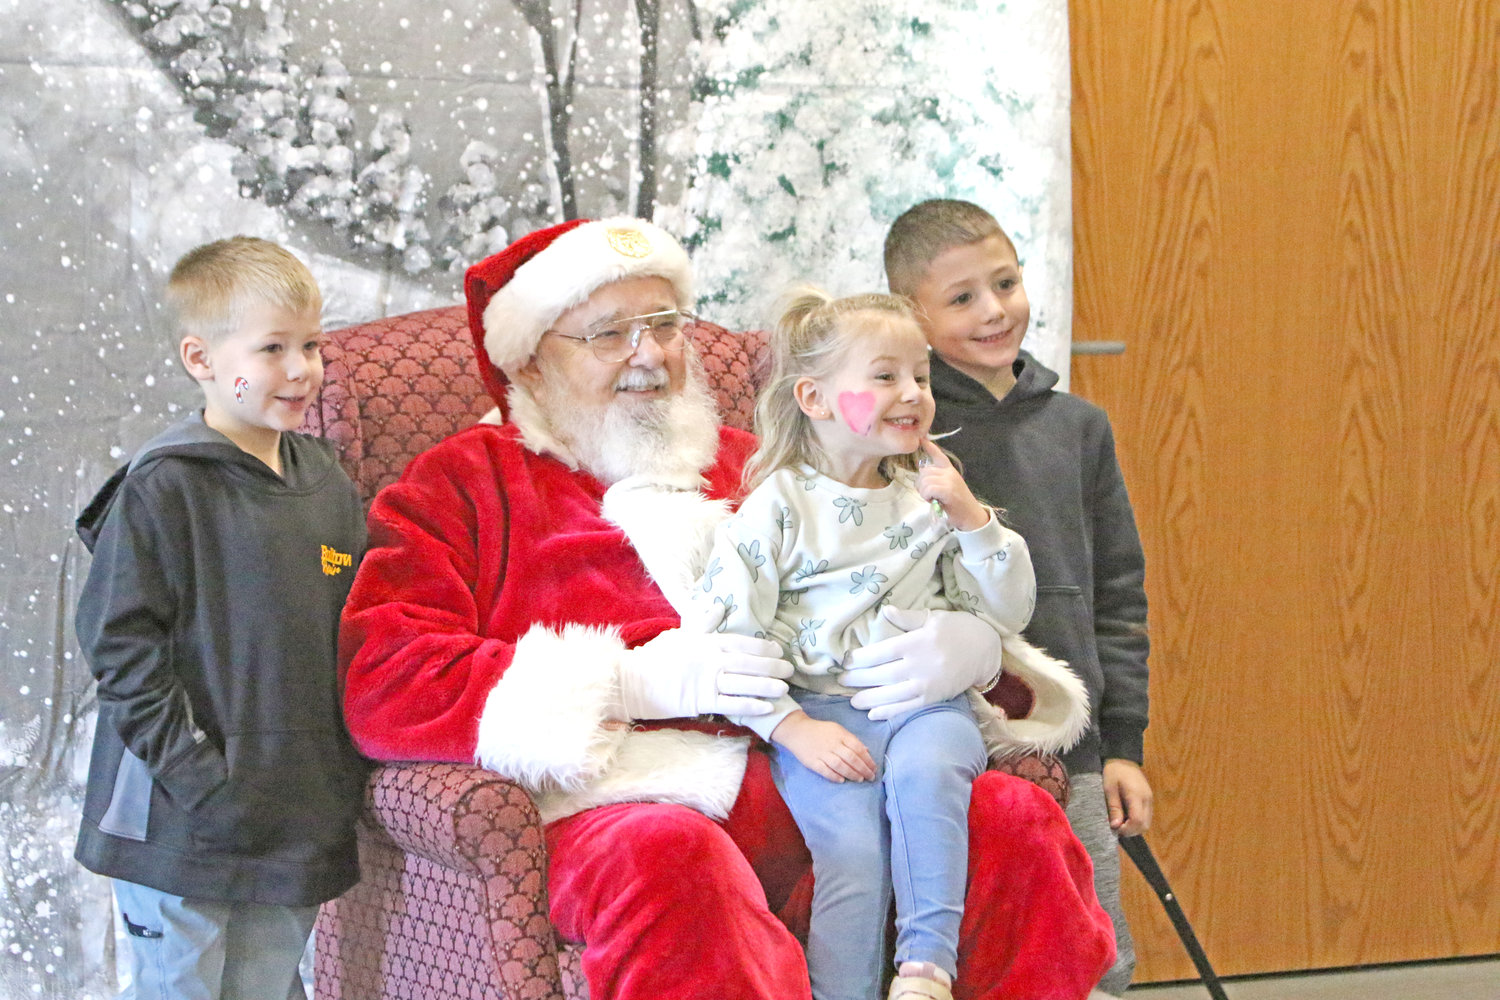 Kids flocked to Santa at the YMCA, whose visit was sponsored by The News/Slechta Communications.